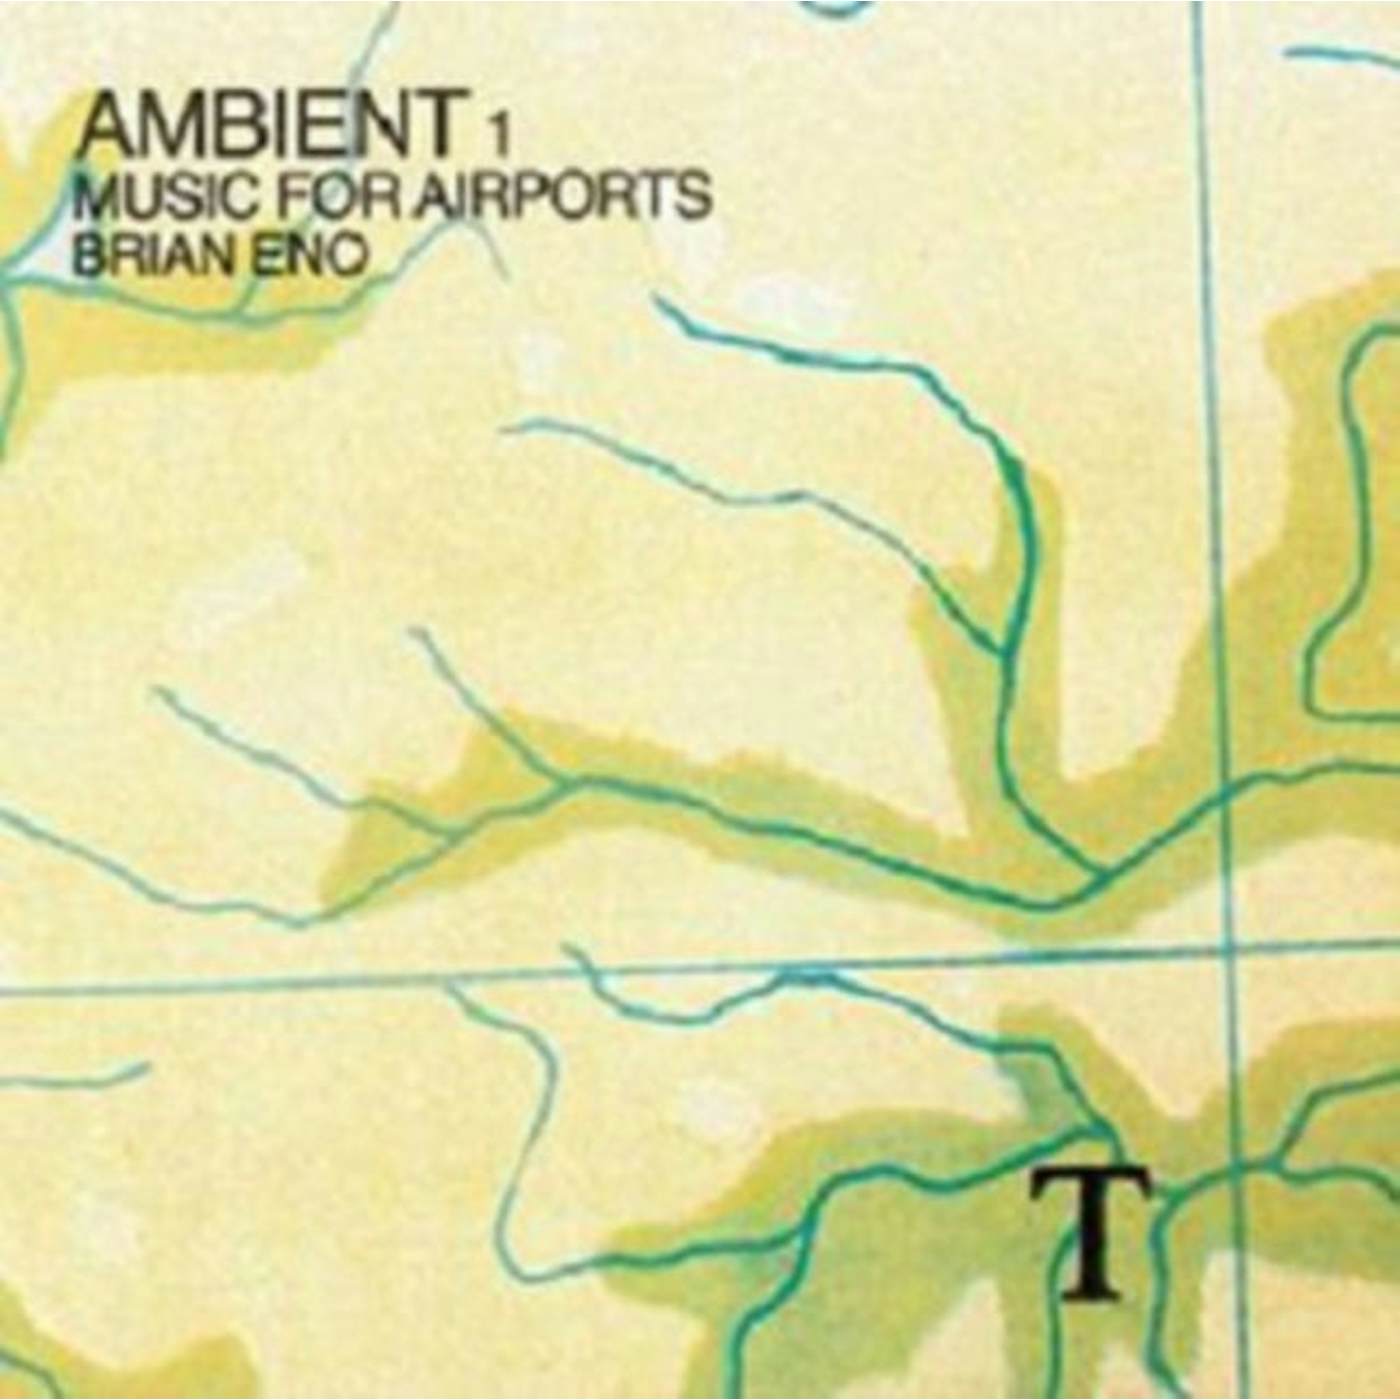 Brian Eno CD - Ambient 1/Music For Airports